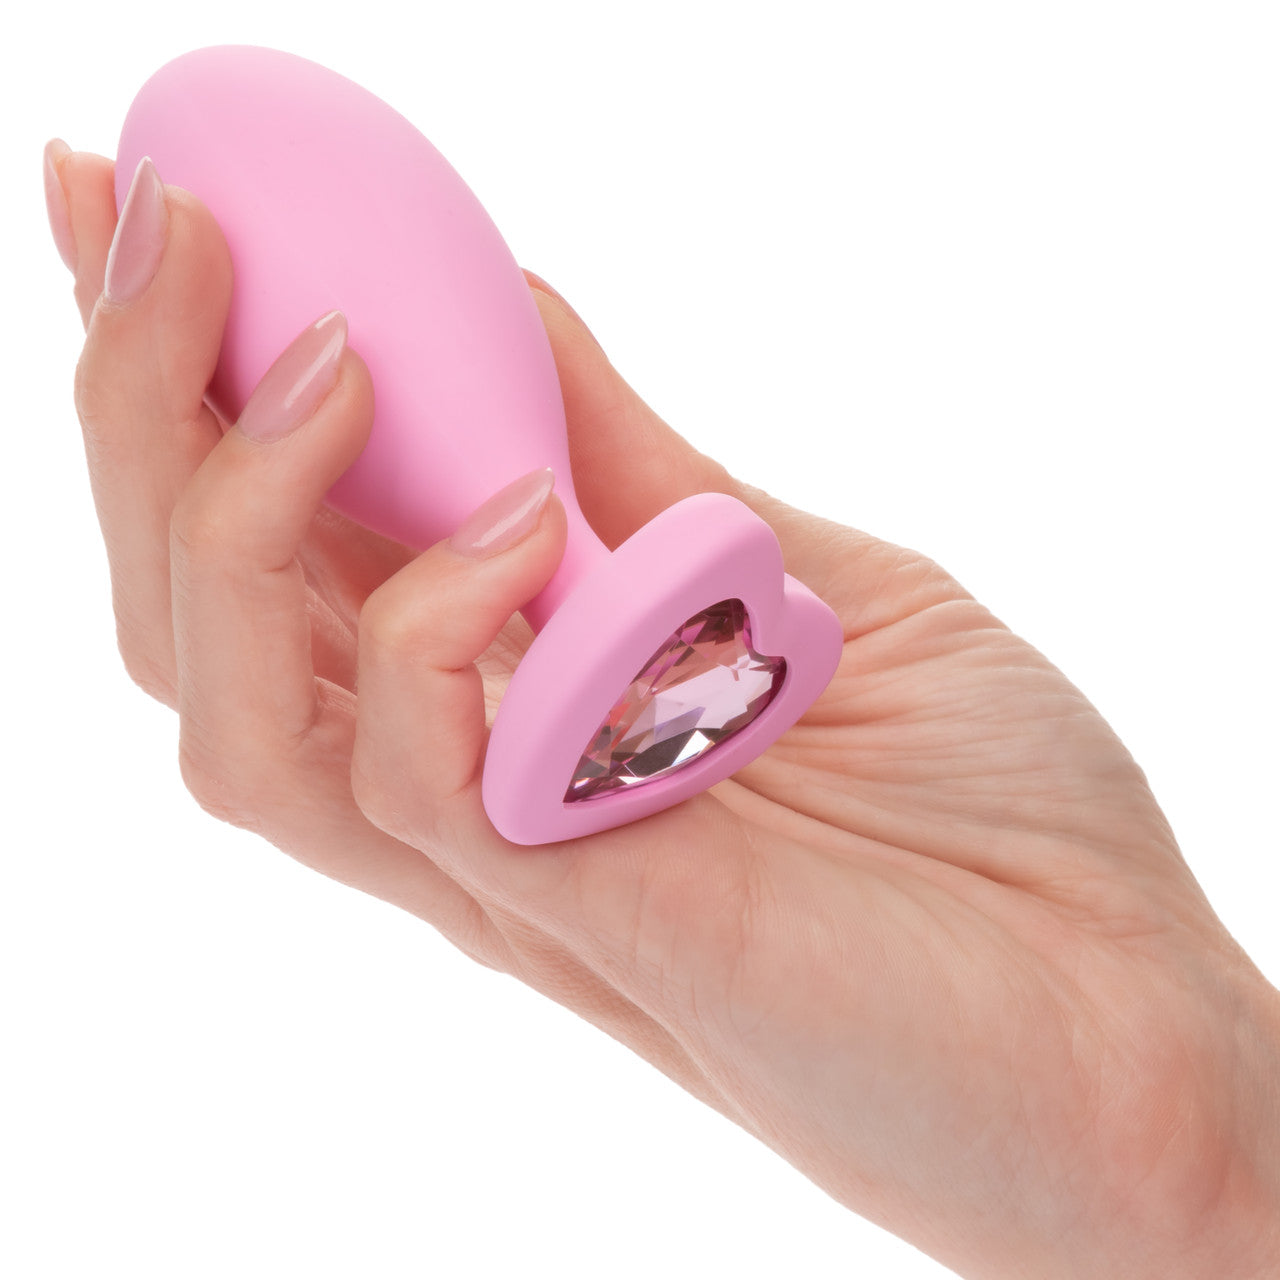 Hand holding pink egg shaped anal plug with a heart shaped gem at base.